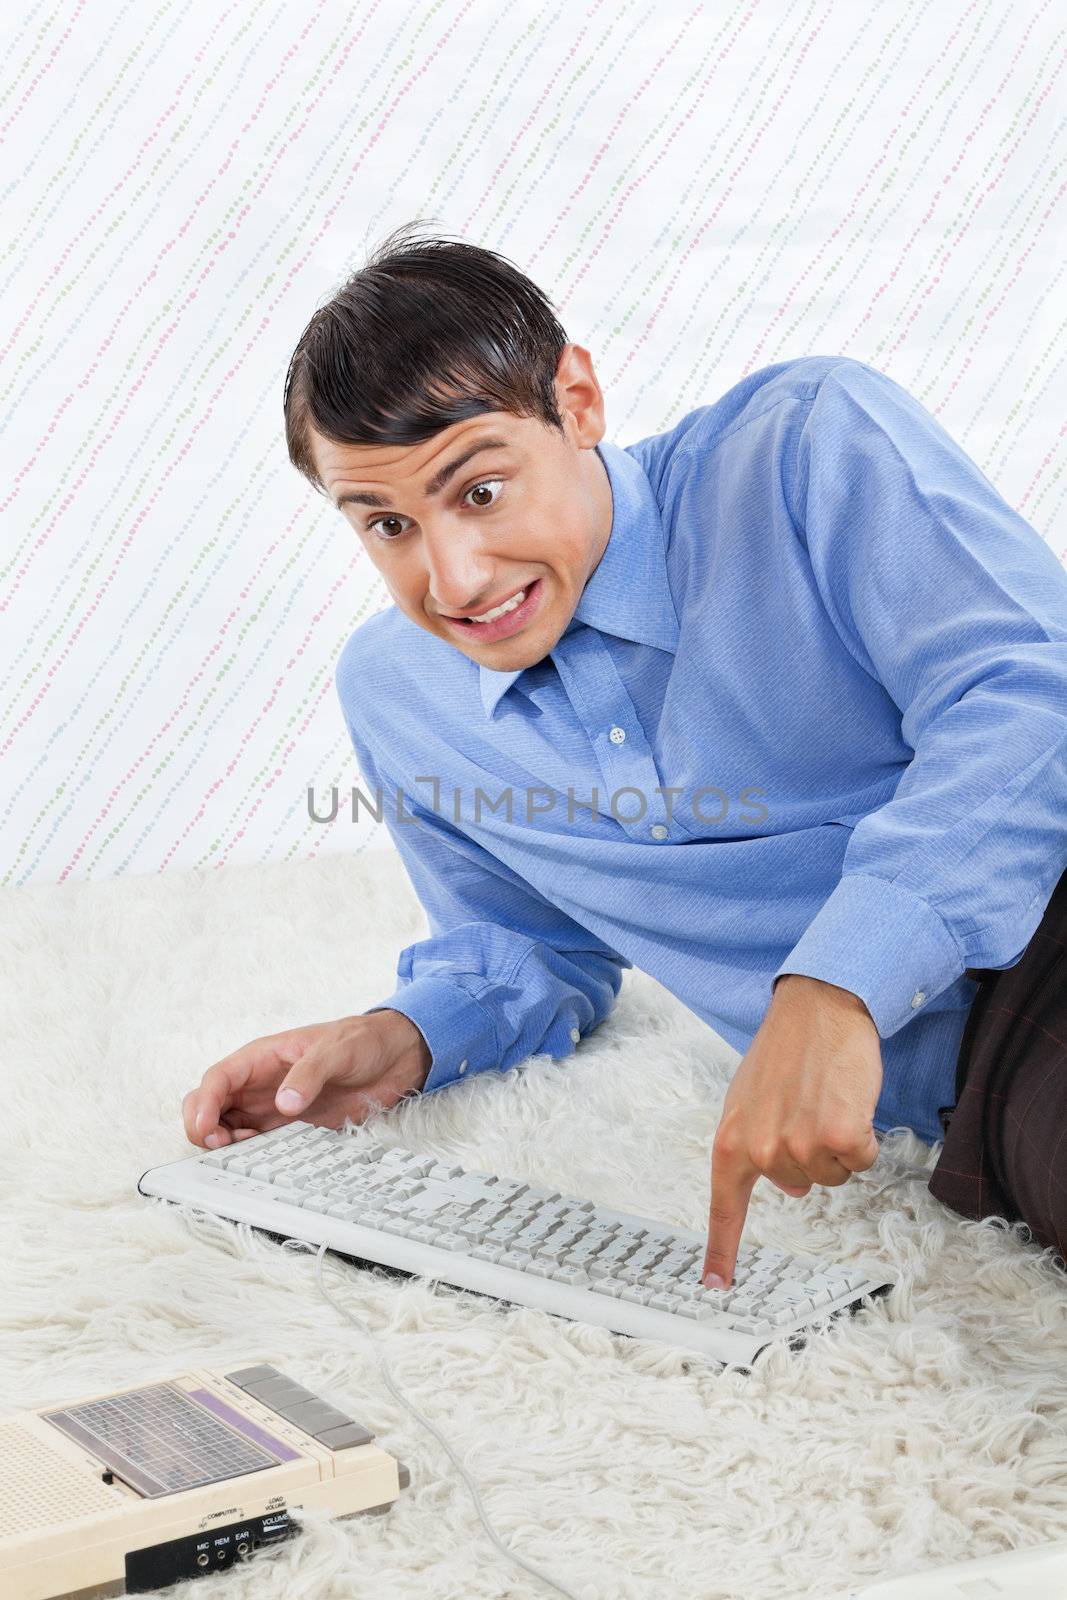 Geek businessman lying on rug with computer keyboard and vintage cassette player